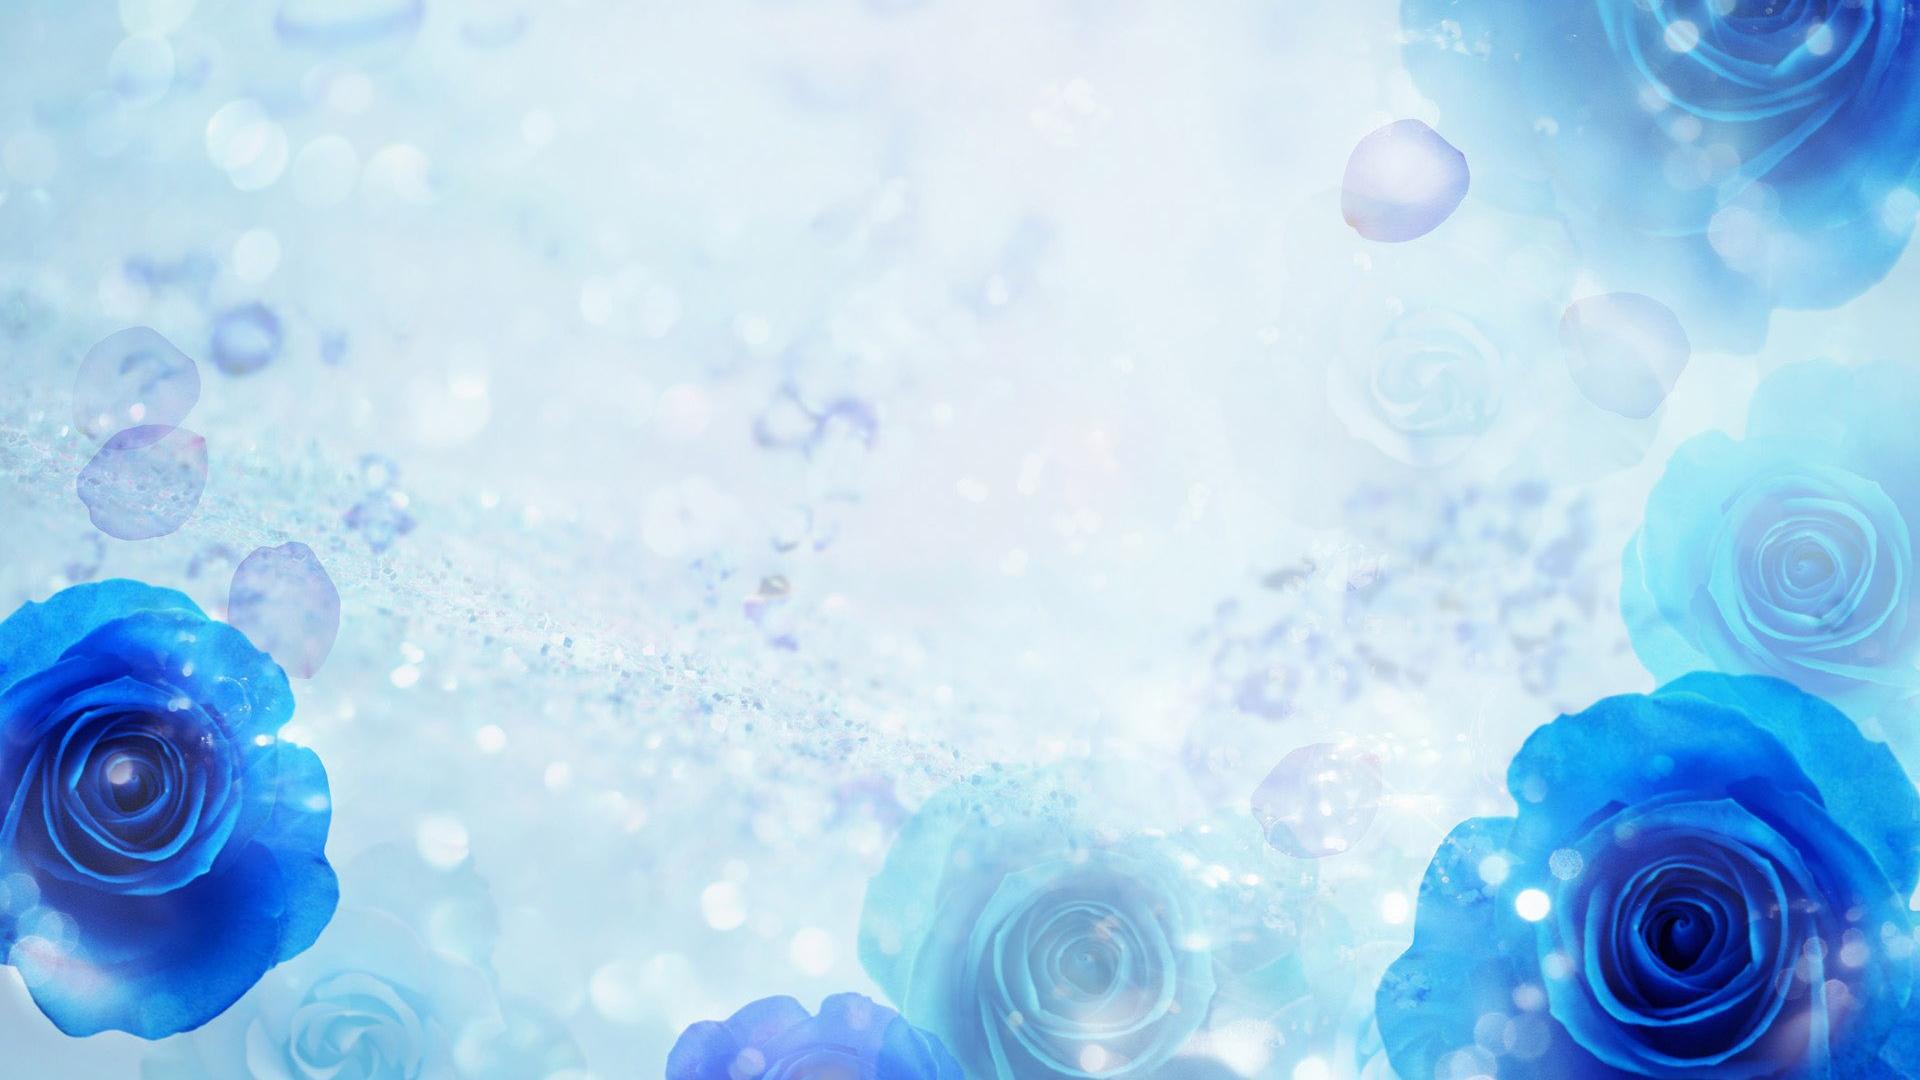 Blue roses on a blue background wallpaper and image